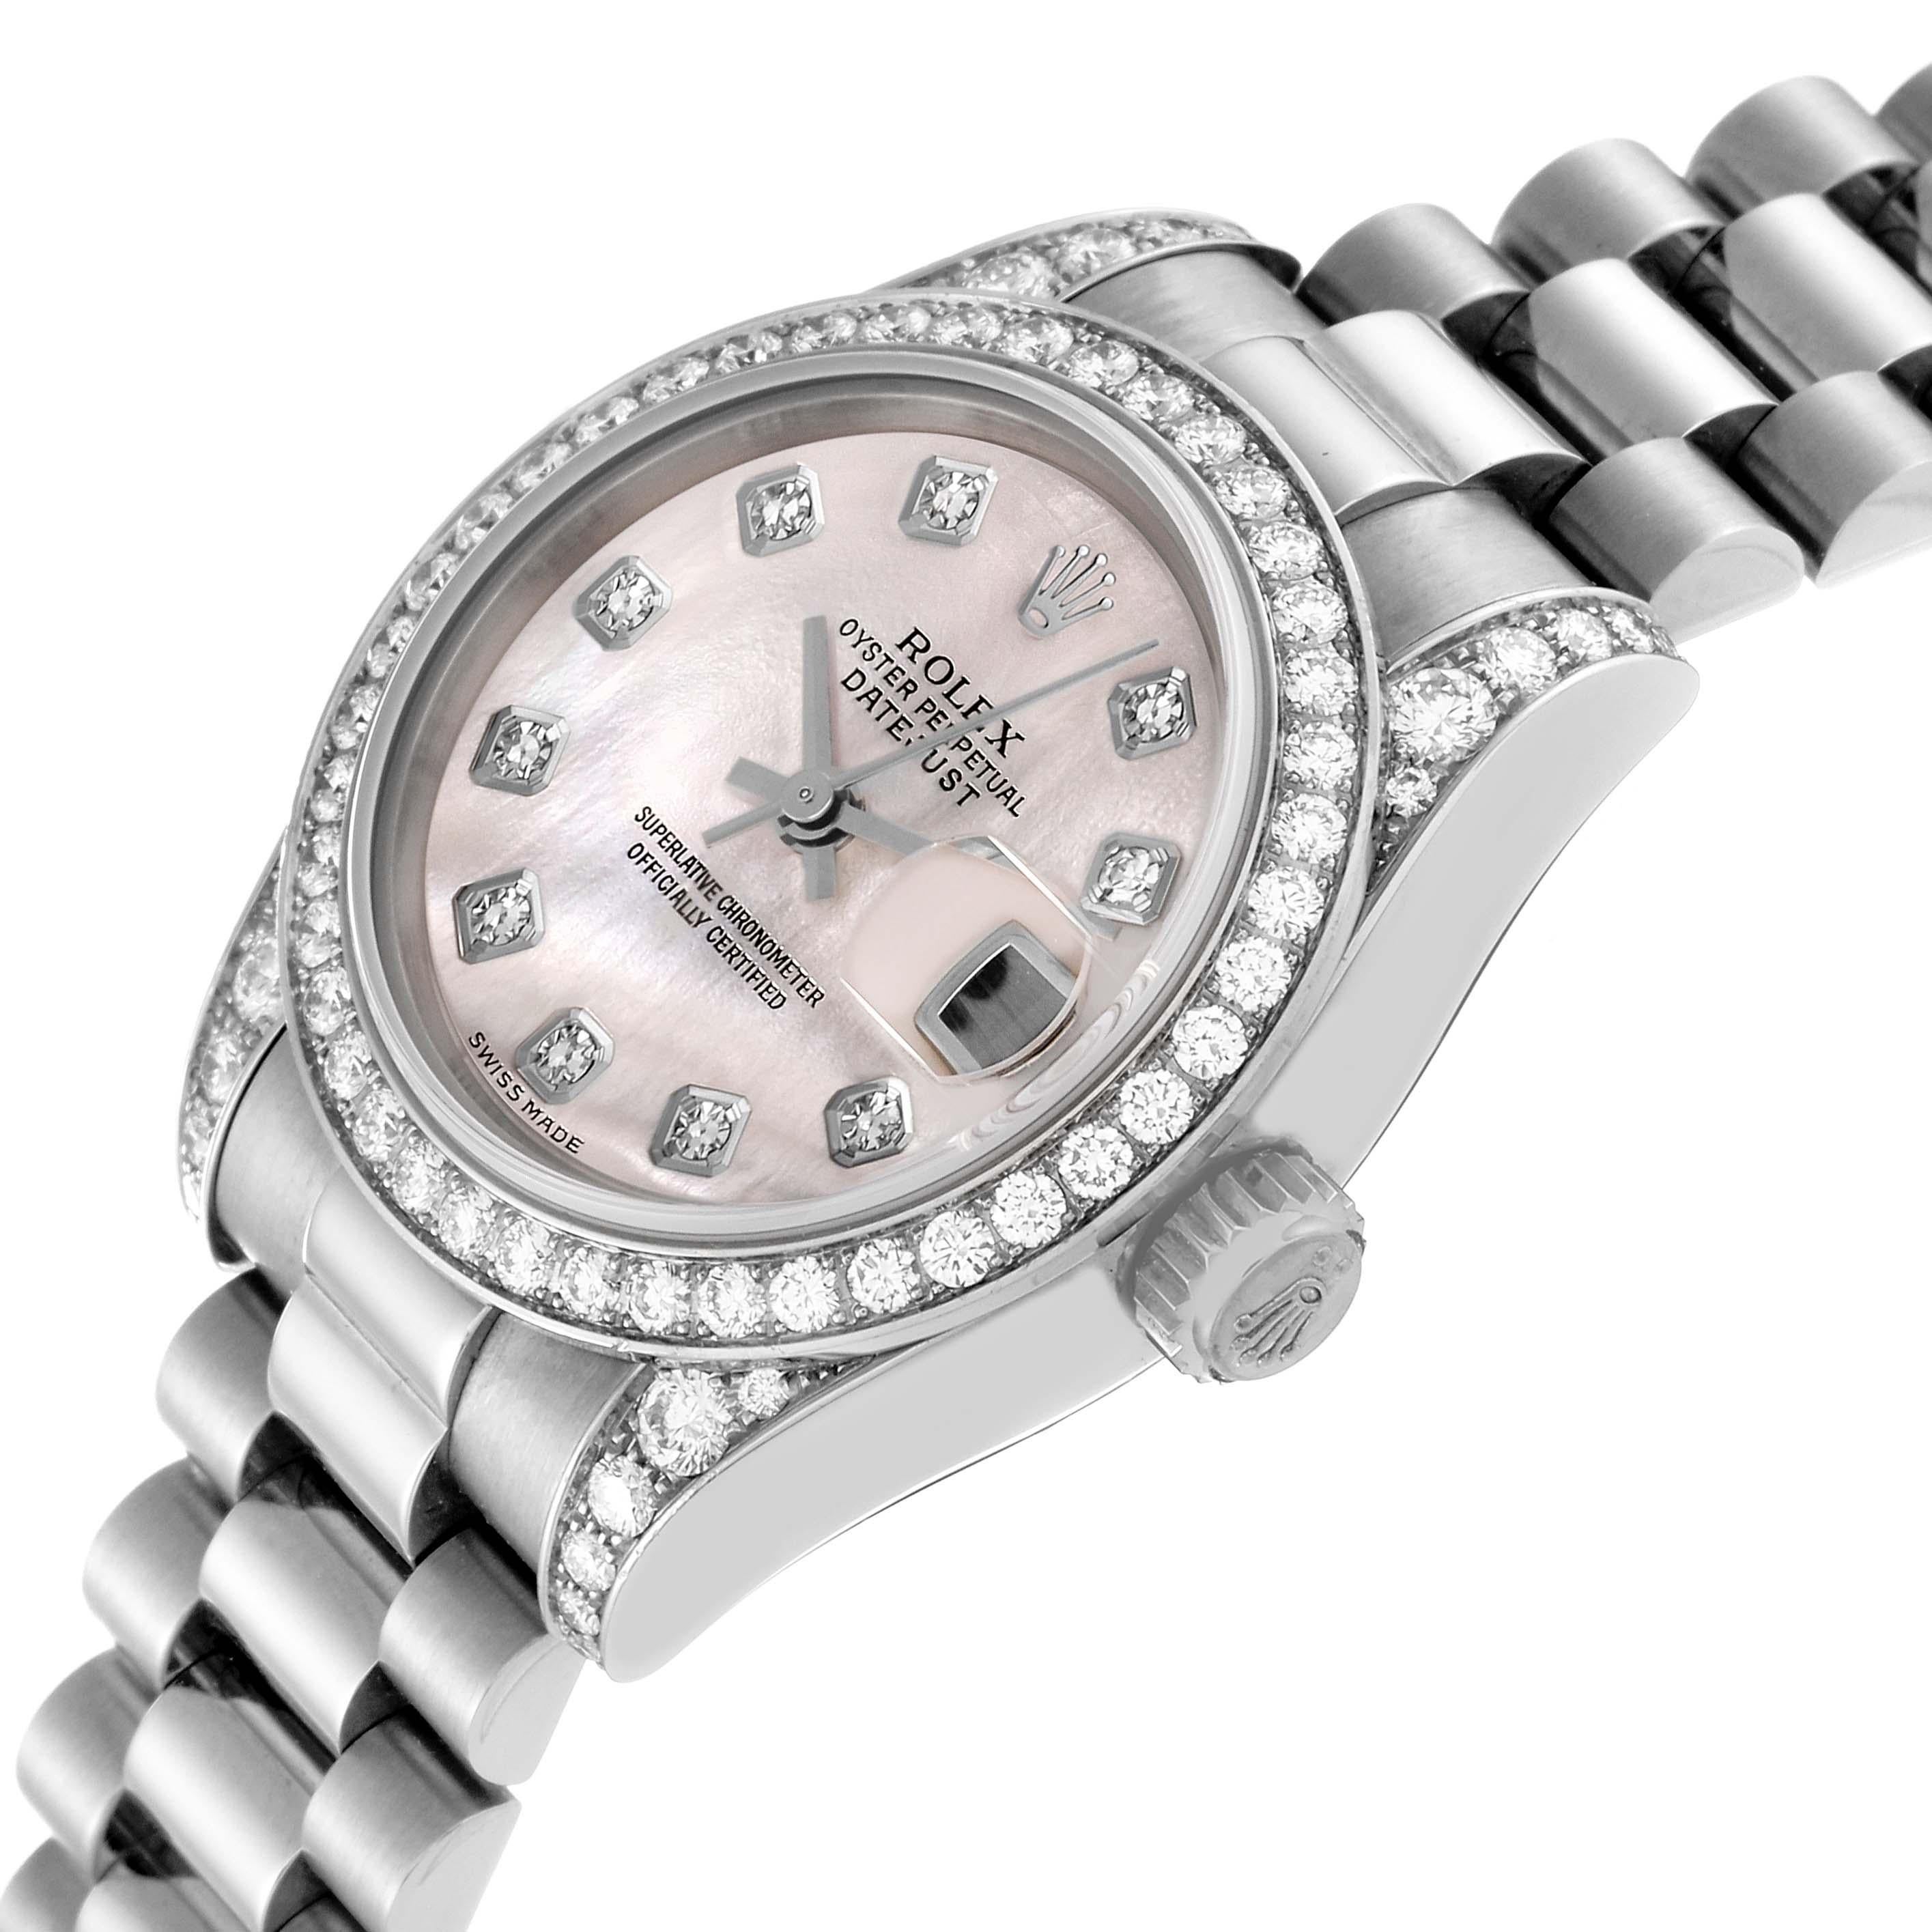 Women's Rolex Datejust President White Gold Mother of Pearl Dial Diamond Watch 179159 For Sale